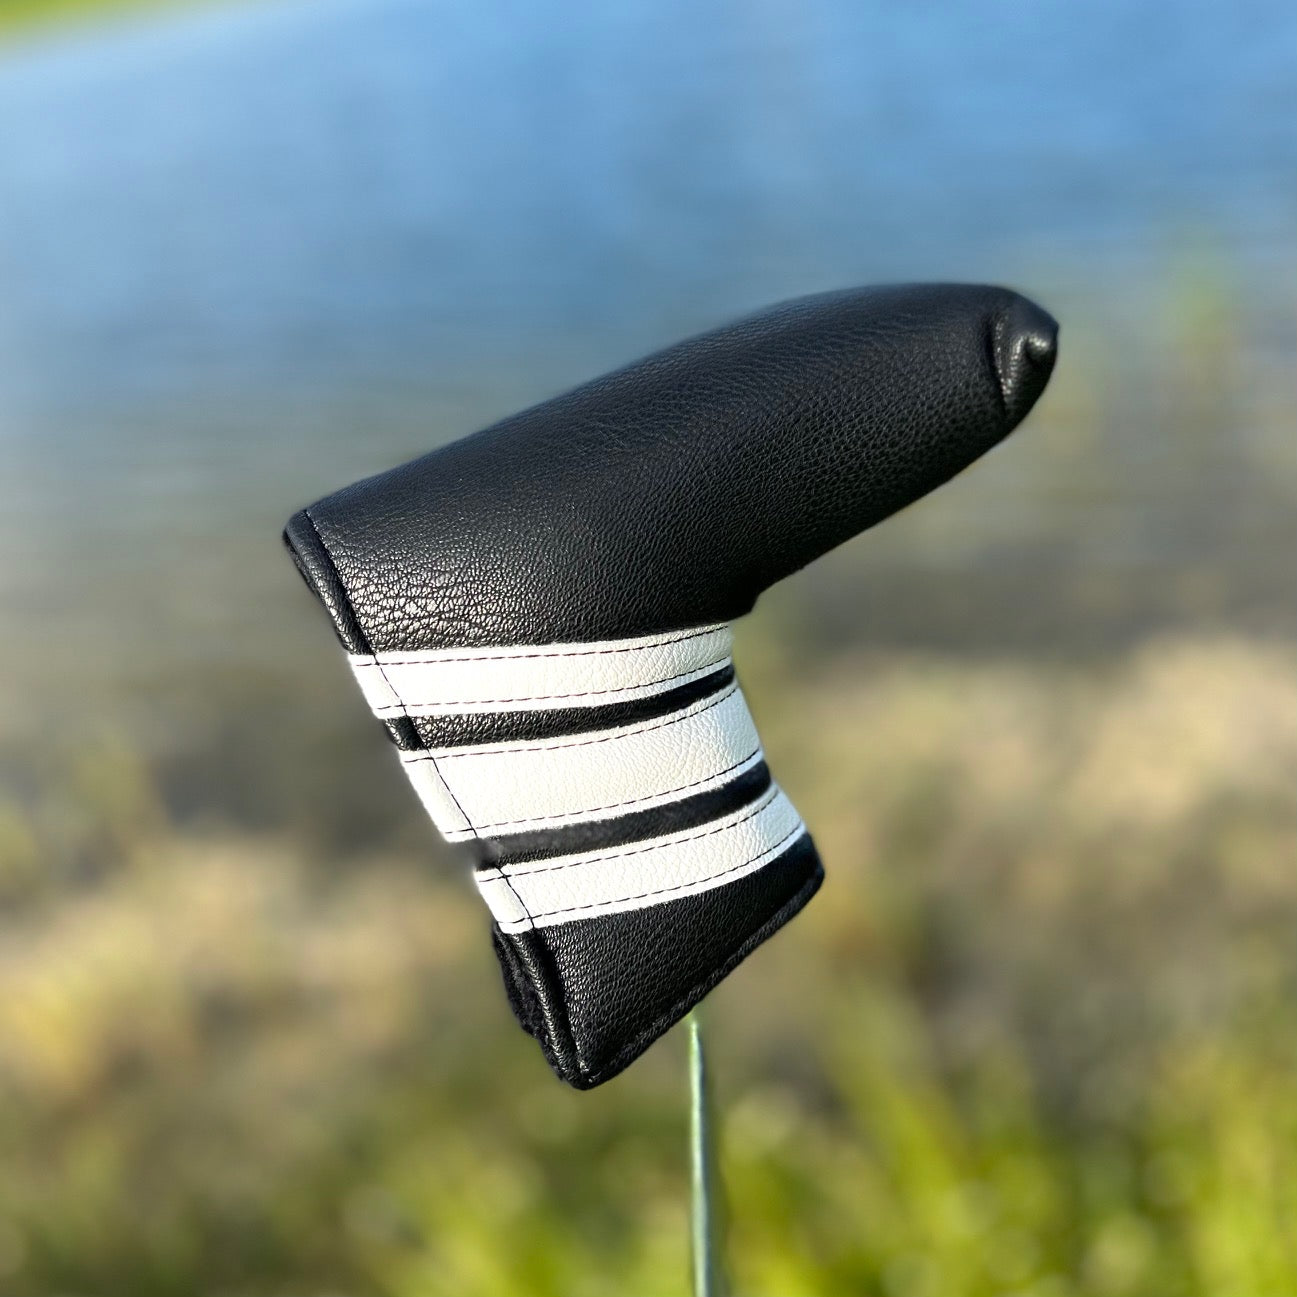 Black Vintage Style Golf Club Head Cover + Alignment Stick Cover